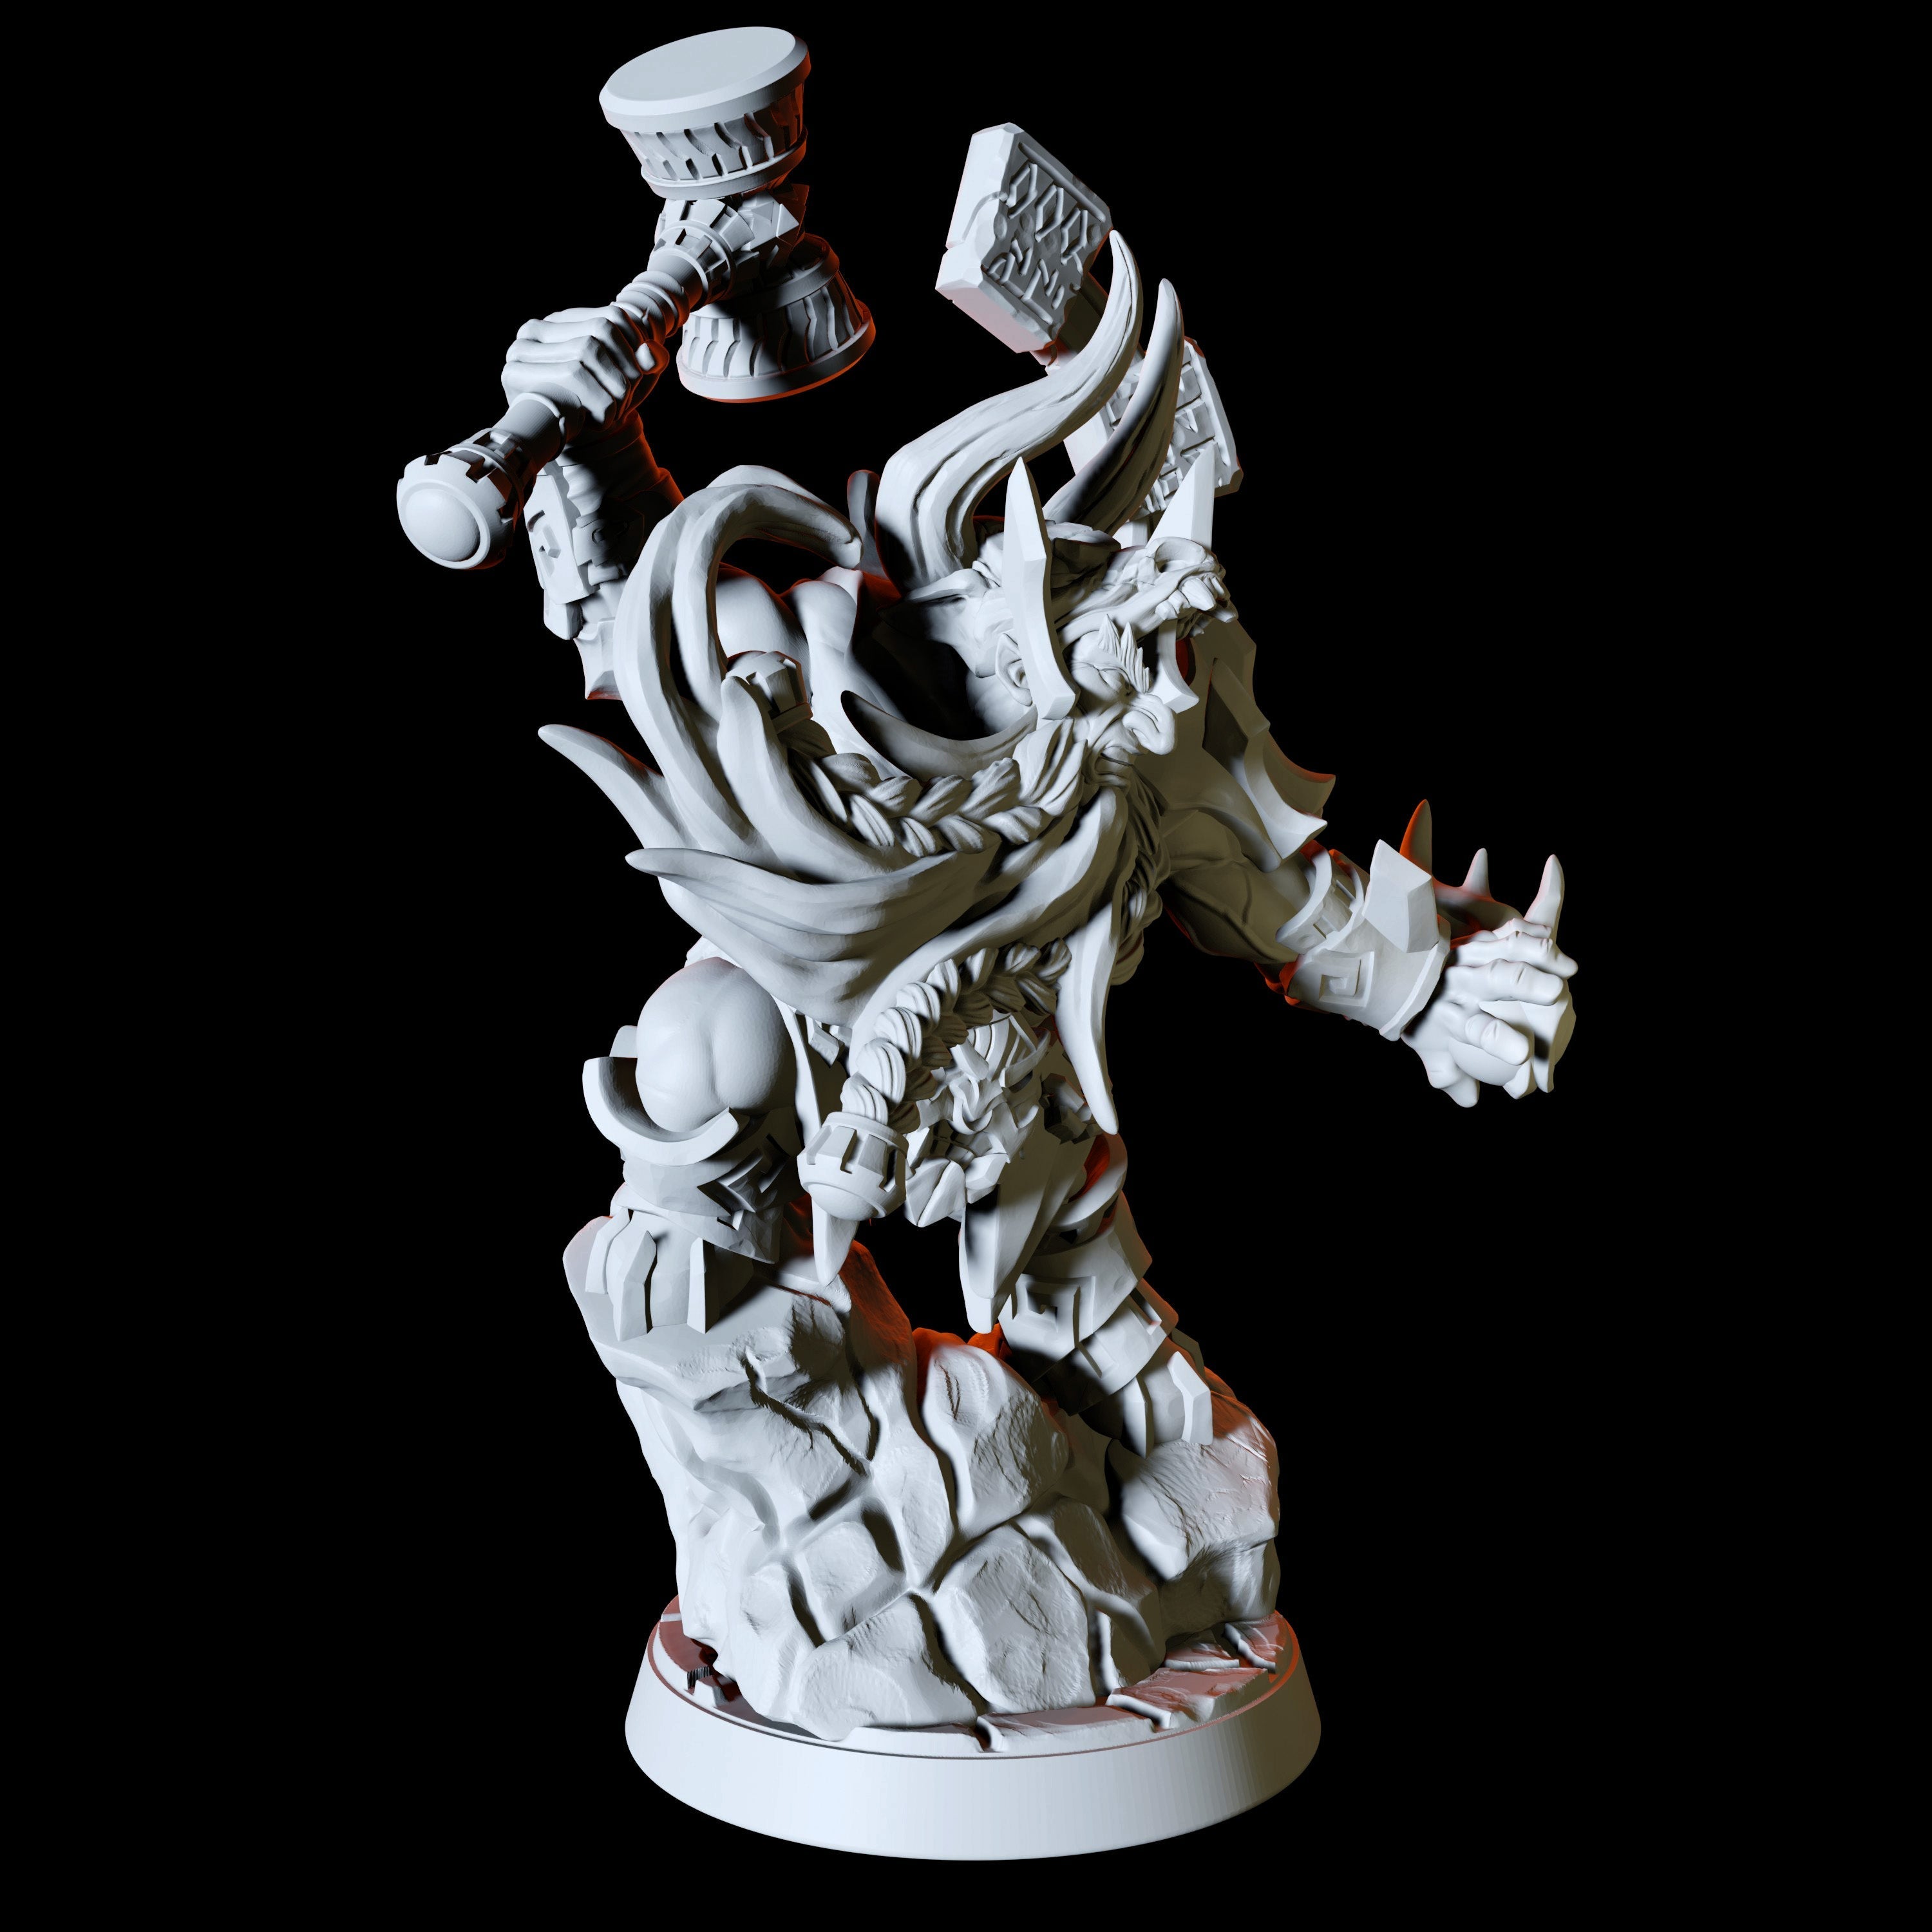 Dwarf Druid Miniature for Dungeons and Dragons